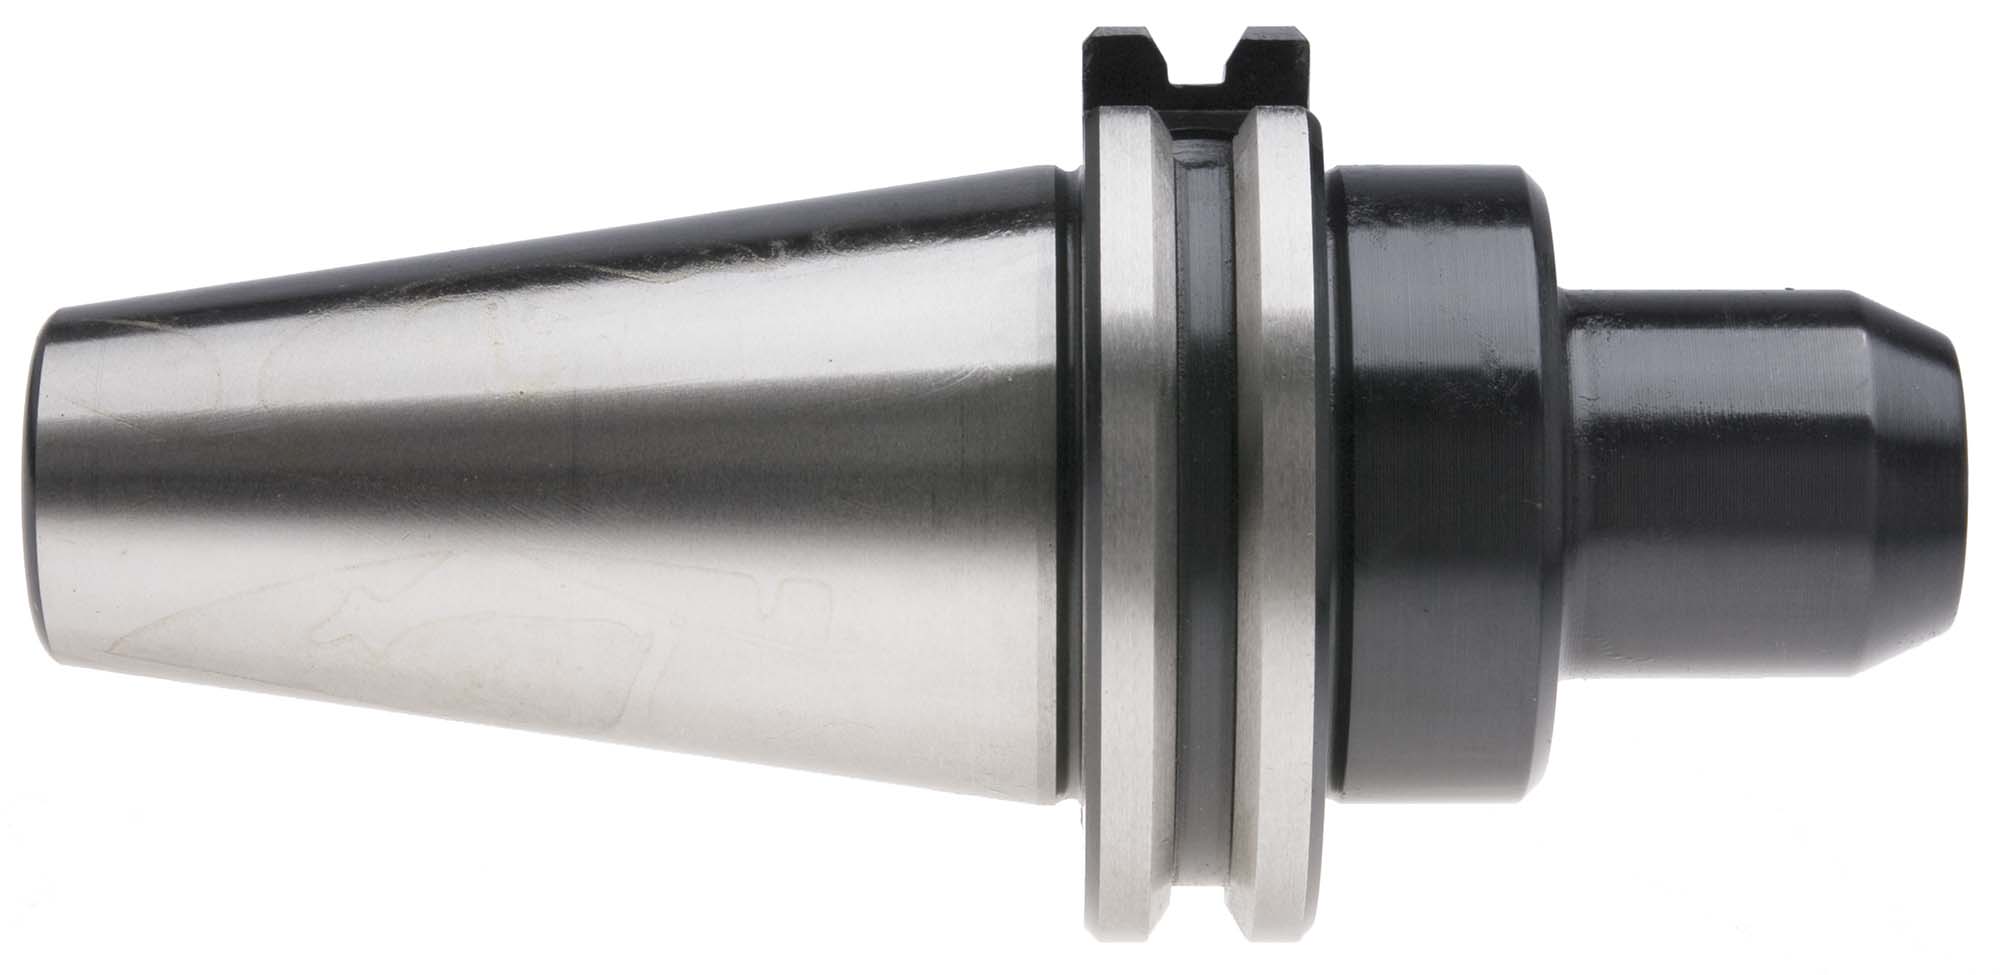 1-1/2" Cat 50 End Mill Adapter